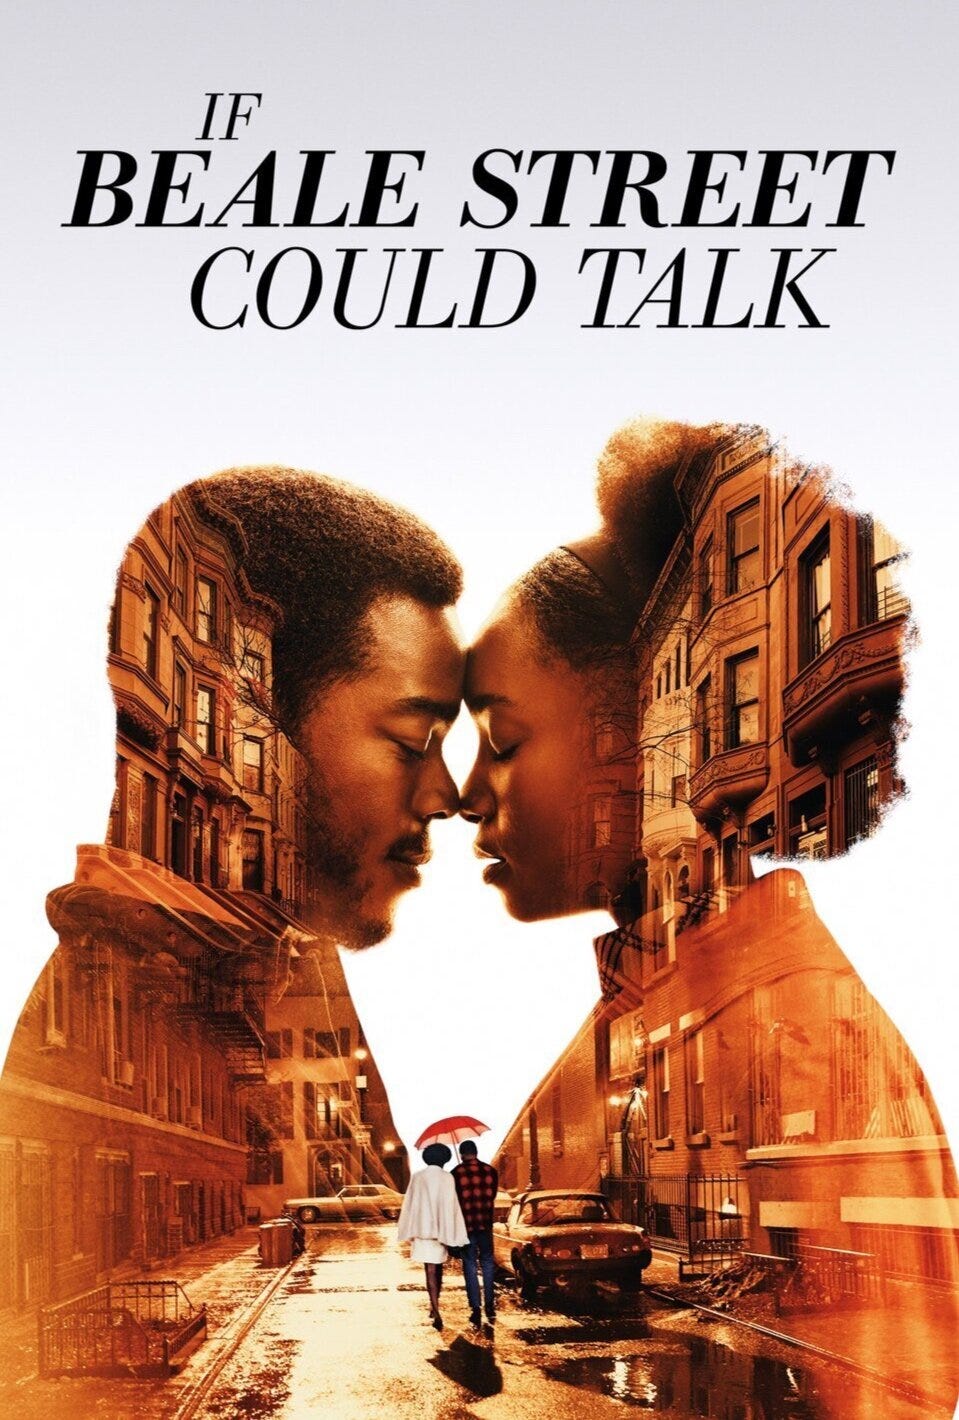 While not my favorite film in the world,  Beale Street  is underrated and important in the absolute poetry through film that Barry Jenkins accomplishes here. I don’t think I’ve ever seen black love be portrayed so beautifully before.  Available now on Hulu. (6/30/20)